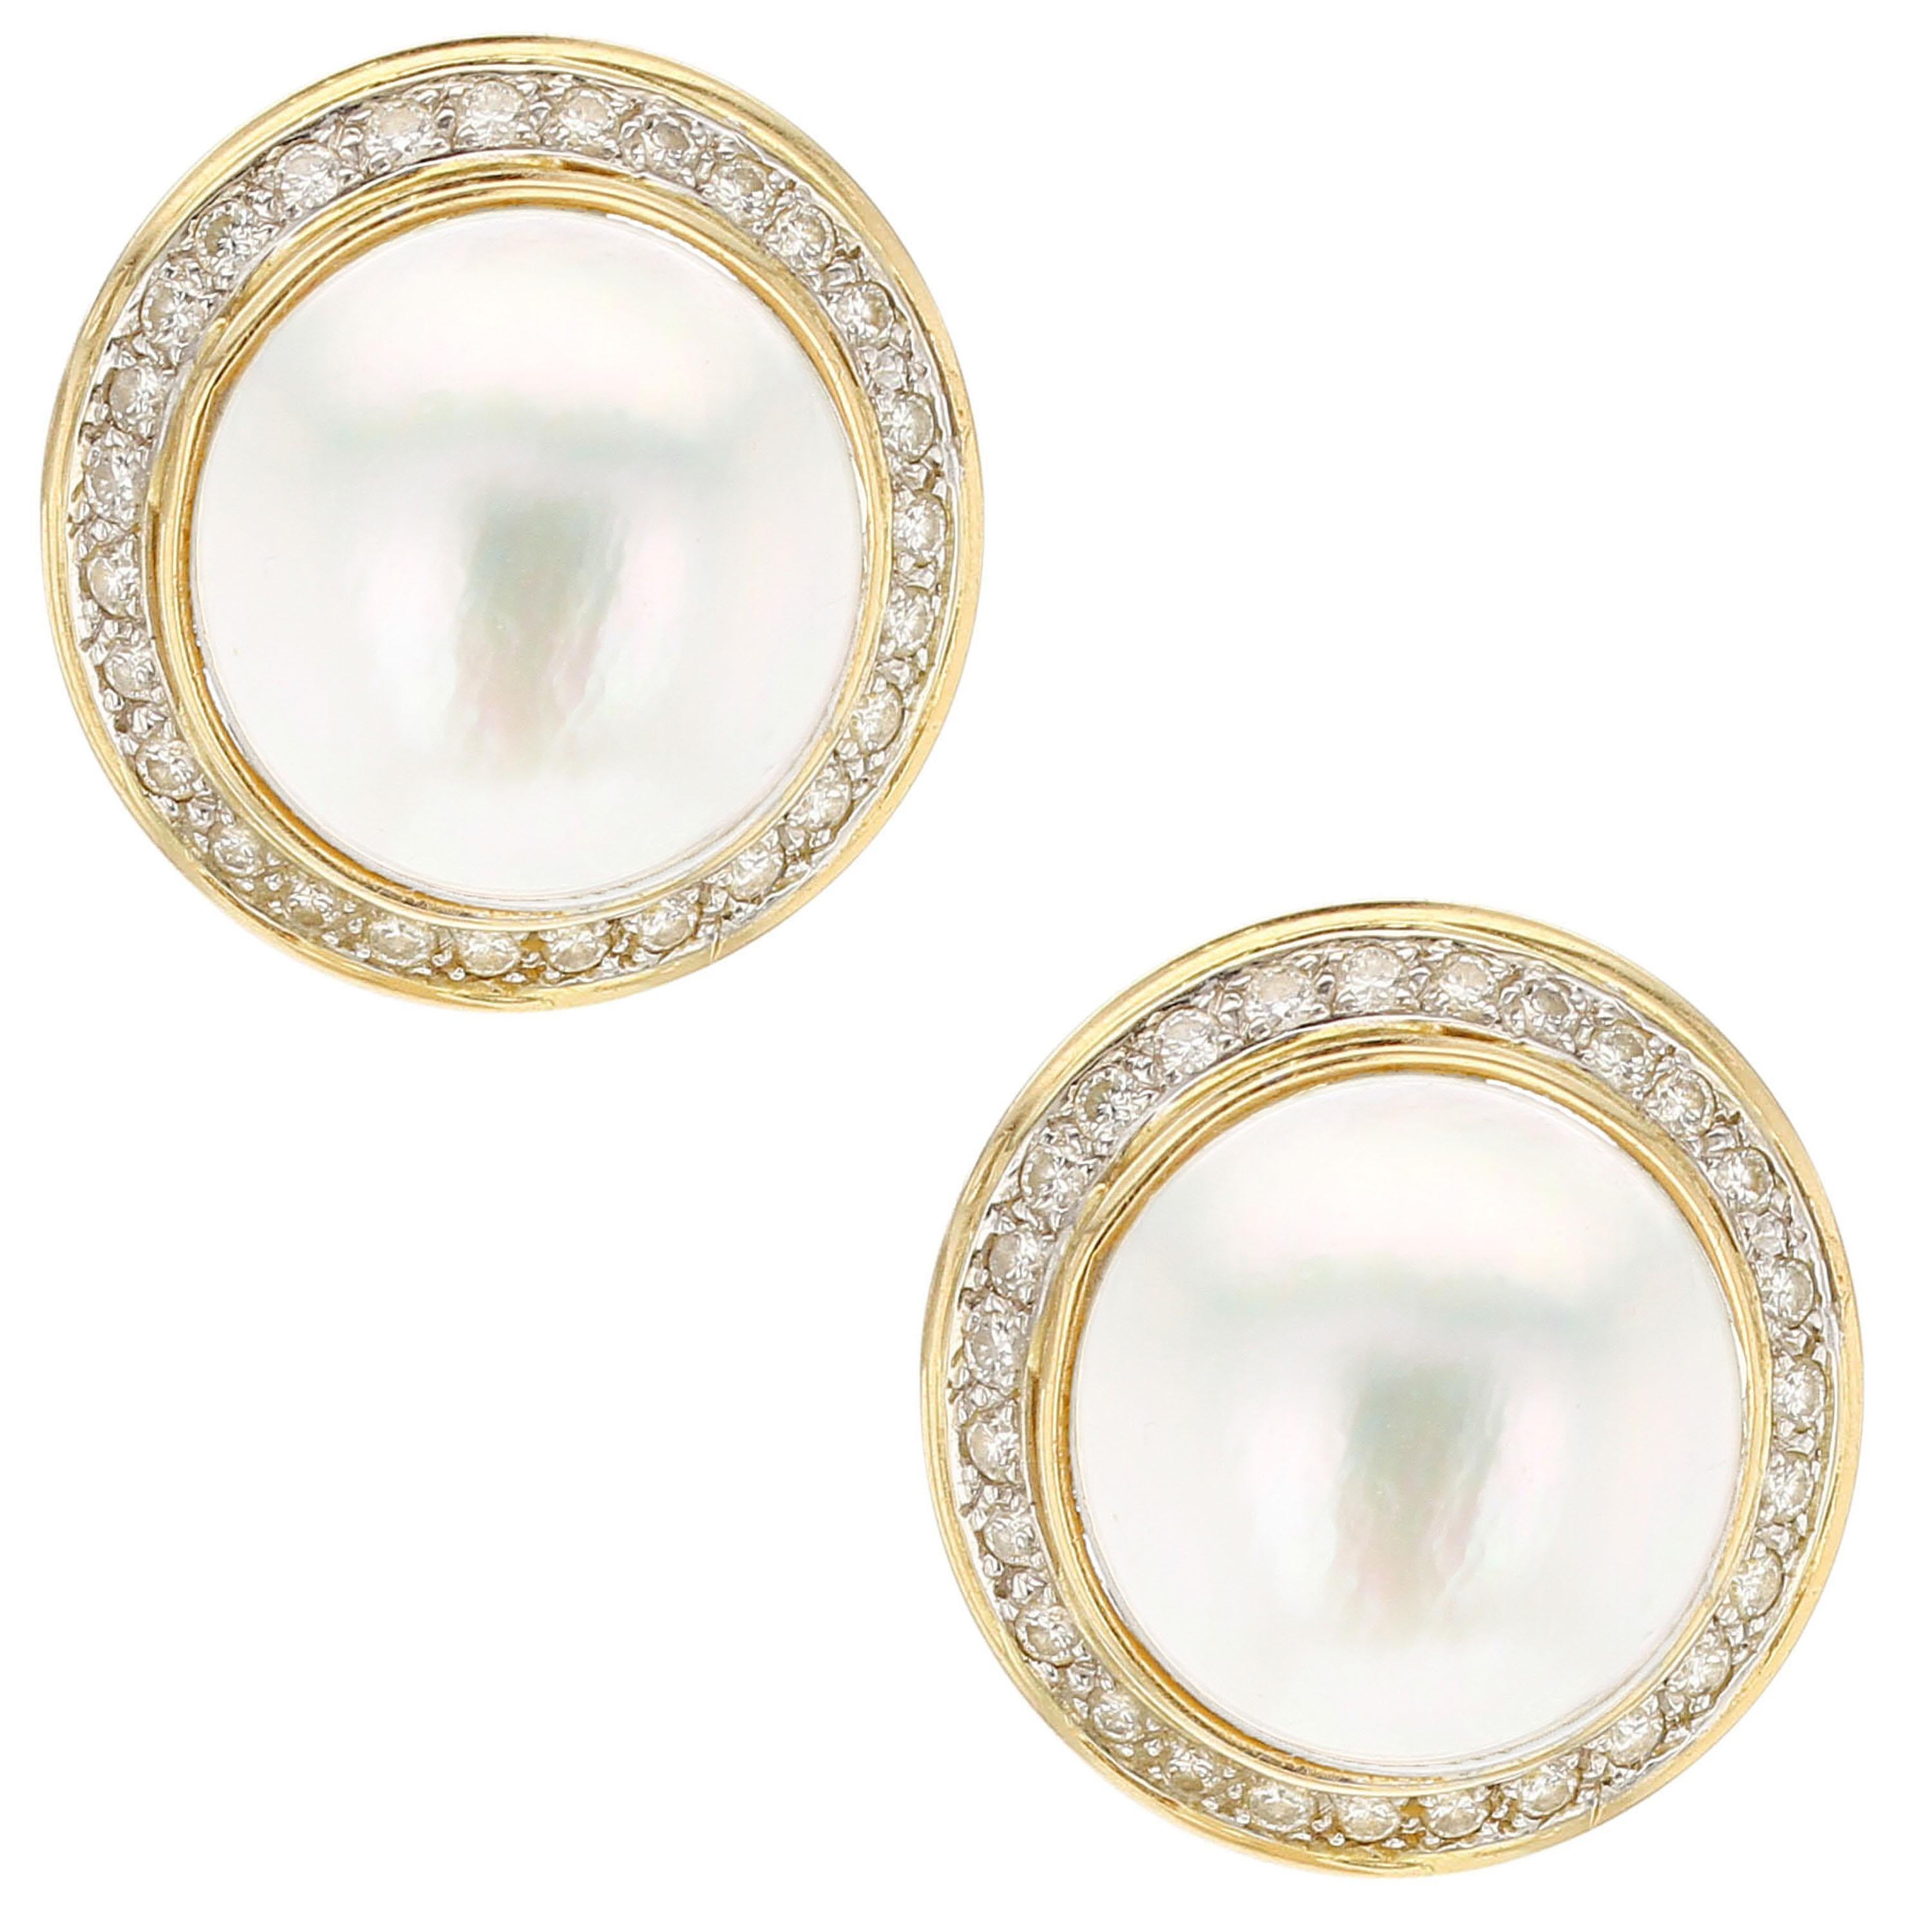 A 16.40 MM White Mabe Pearl Pair of Earrings, each wrapped with a circle of 26 round brilliant-cut diamonds in 14K Yellow Gold. Pierced clip backs. Earring Length: 0.80”